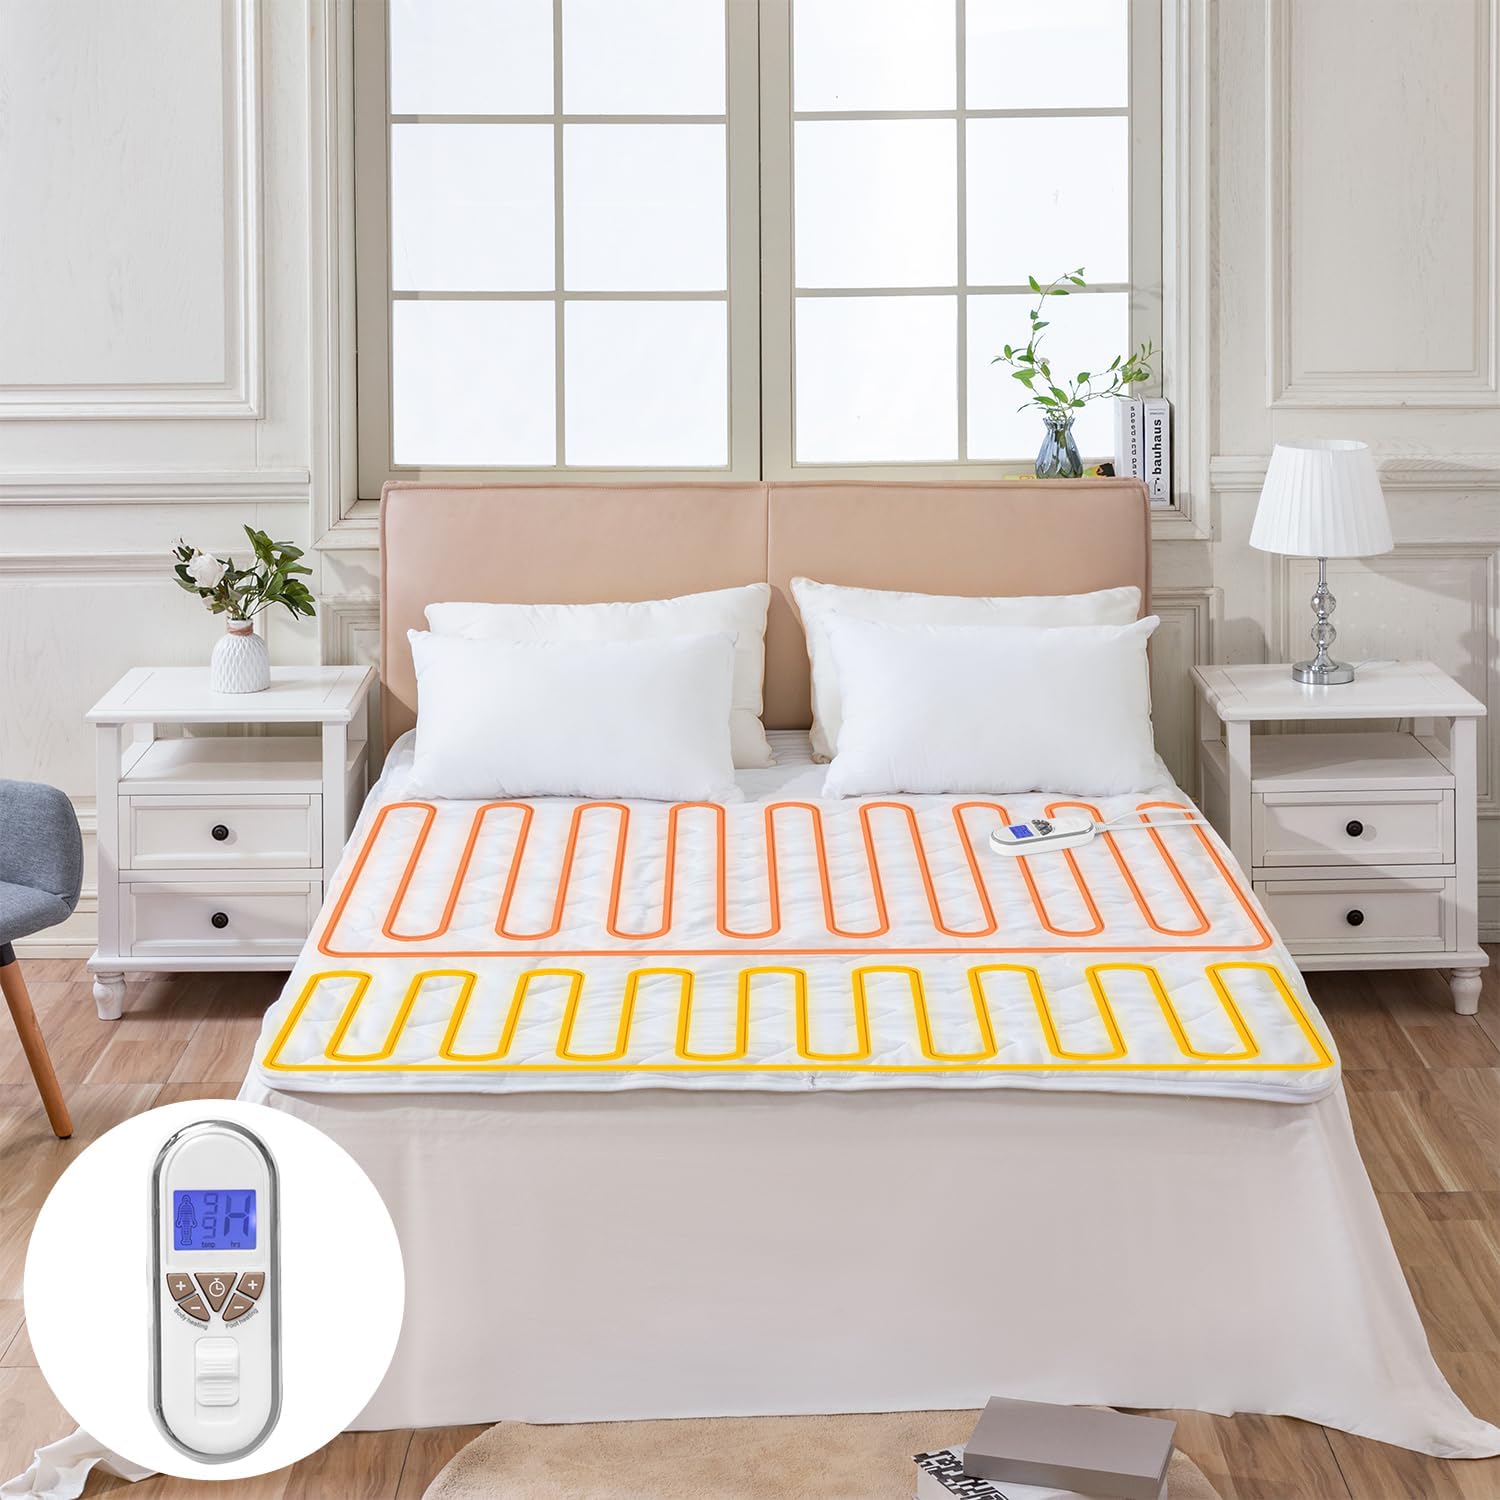 Premium Multi-Zone Electric Heated Mattress Pad Single Controller King Size, 78" x 80", 9 Heat Settings, 1-12 Hours Auto Off, Individual Body and Feet Settings, Machine Washable